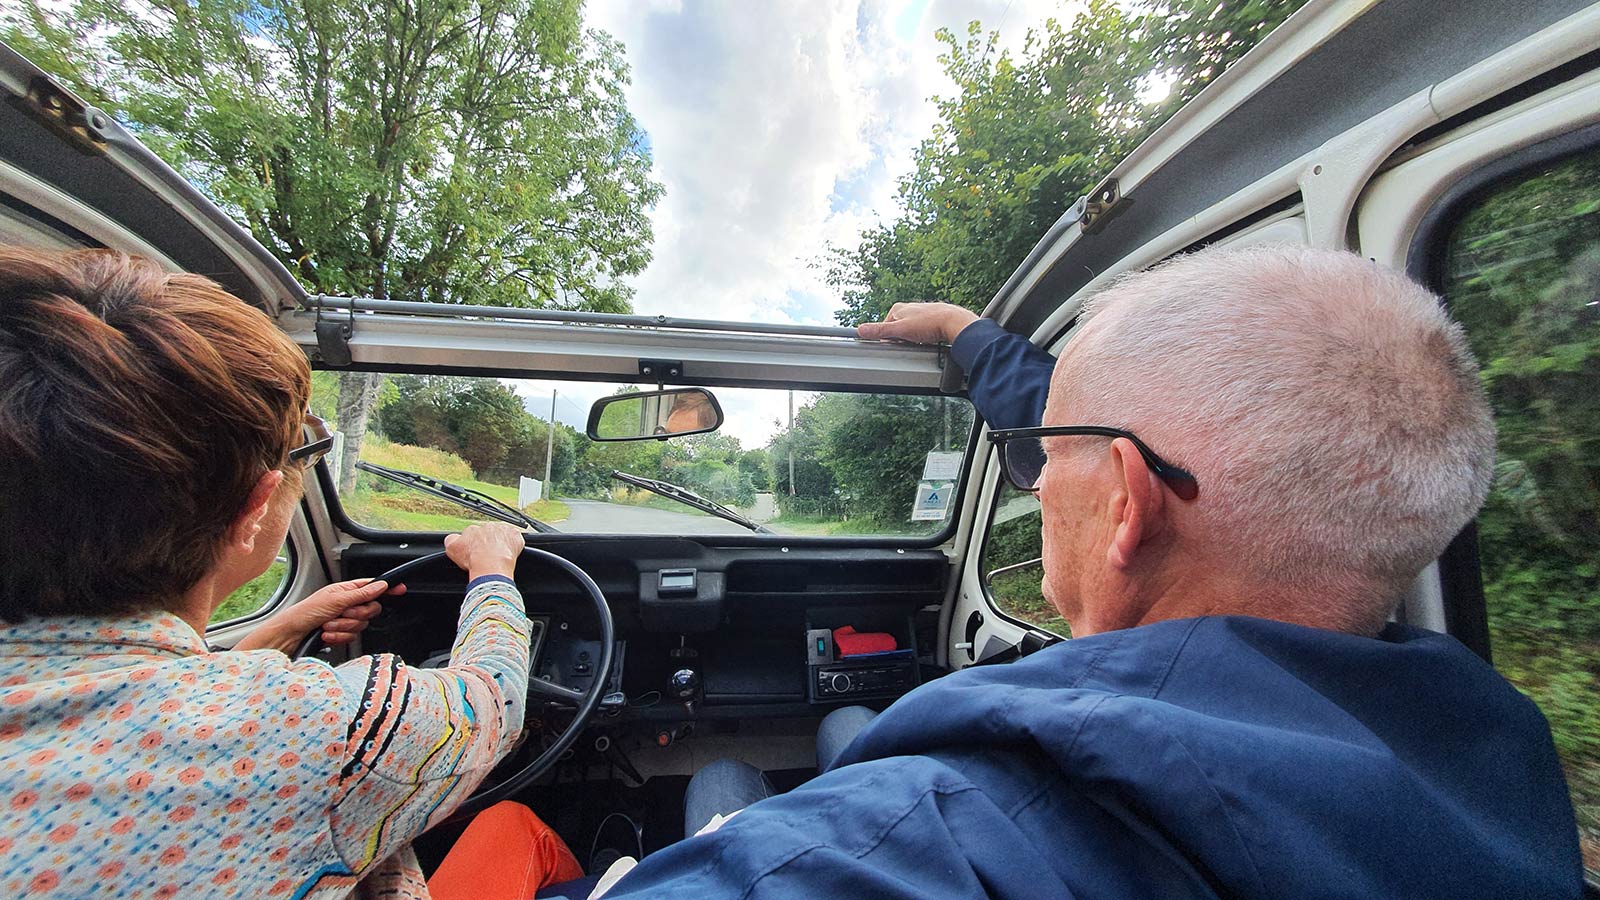 Ride in a 2CV, Experience